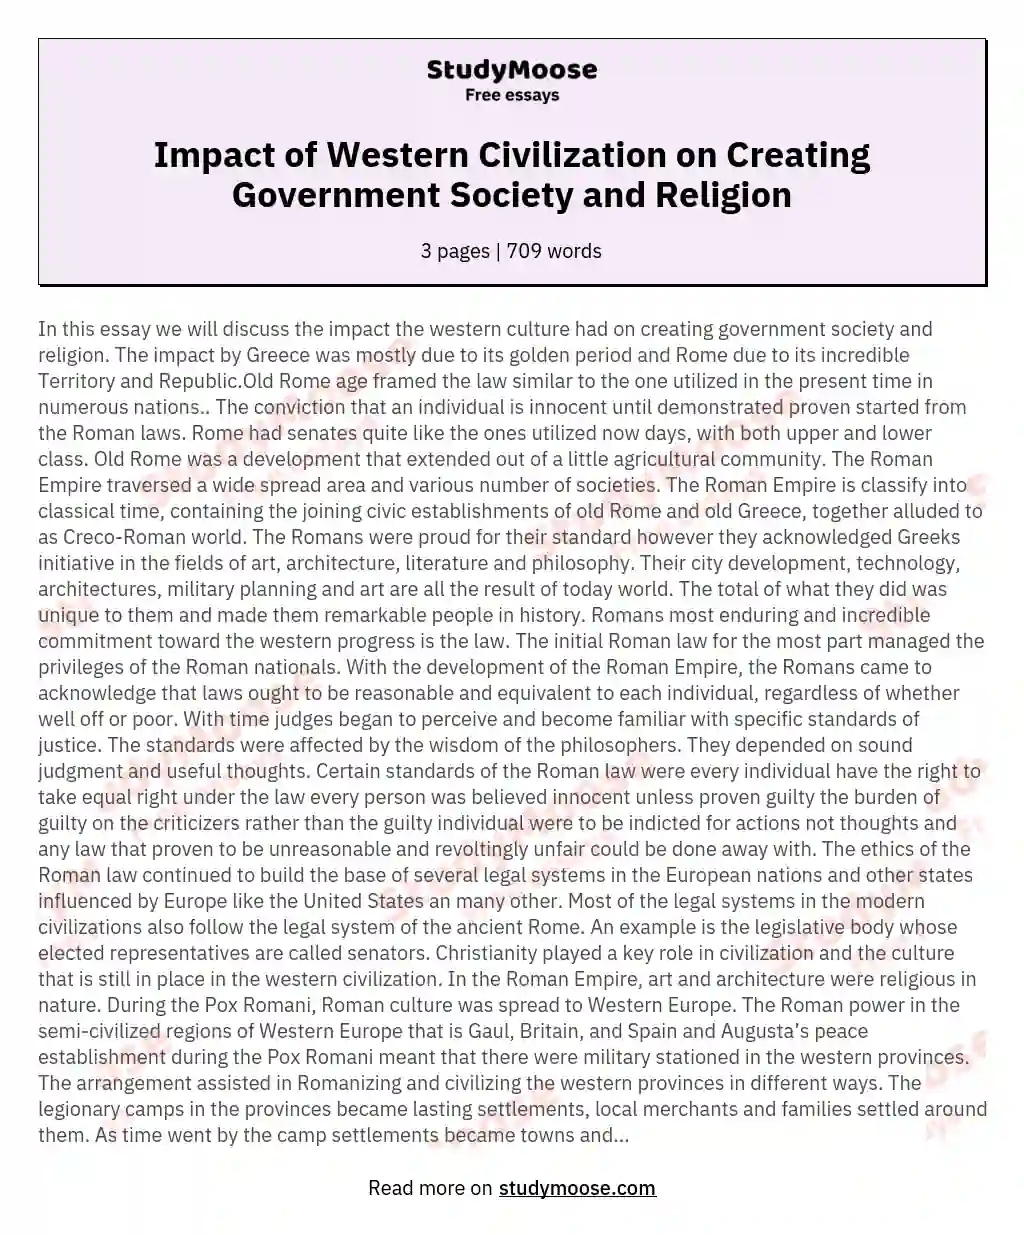 Impact of Western Civilization on Creating Government Society and Religion essay